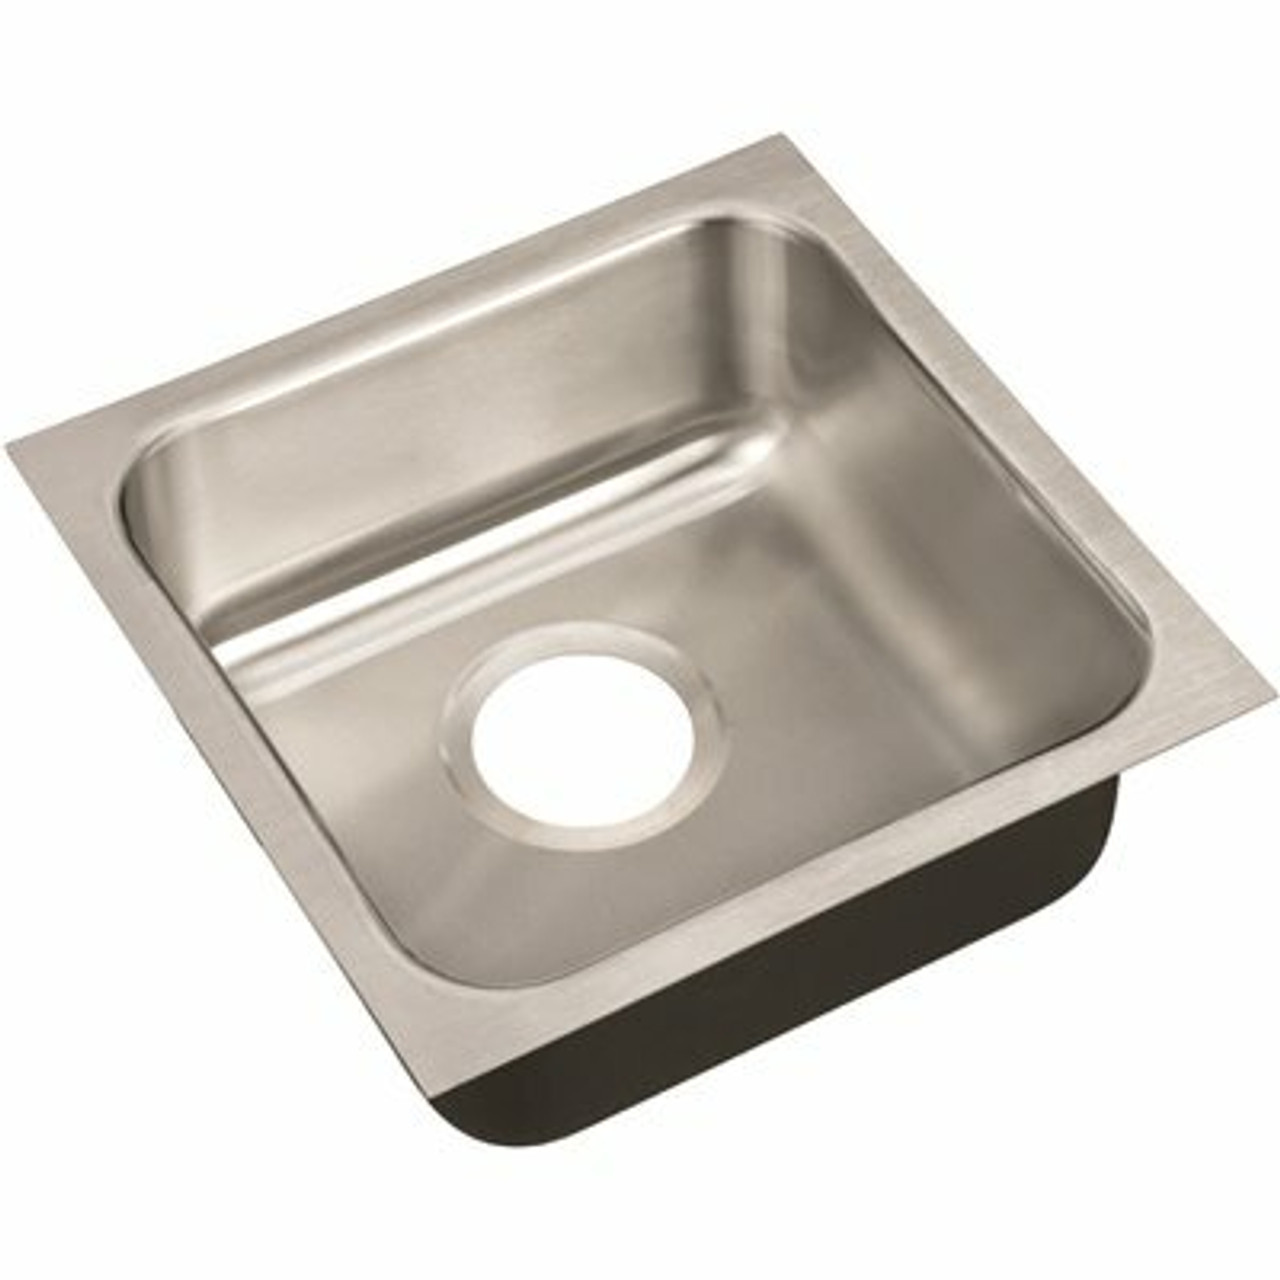 Just Manufacturing 18-Gauge Stainless Steel 18 In. O.D. X 18 In. X 5.5 In. Dcr Single Bowl Ada Compliant Undermount Sink